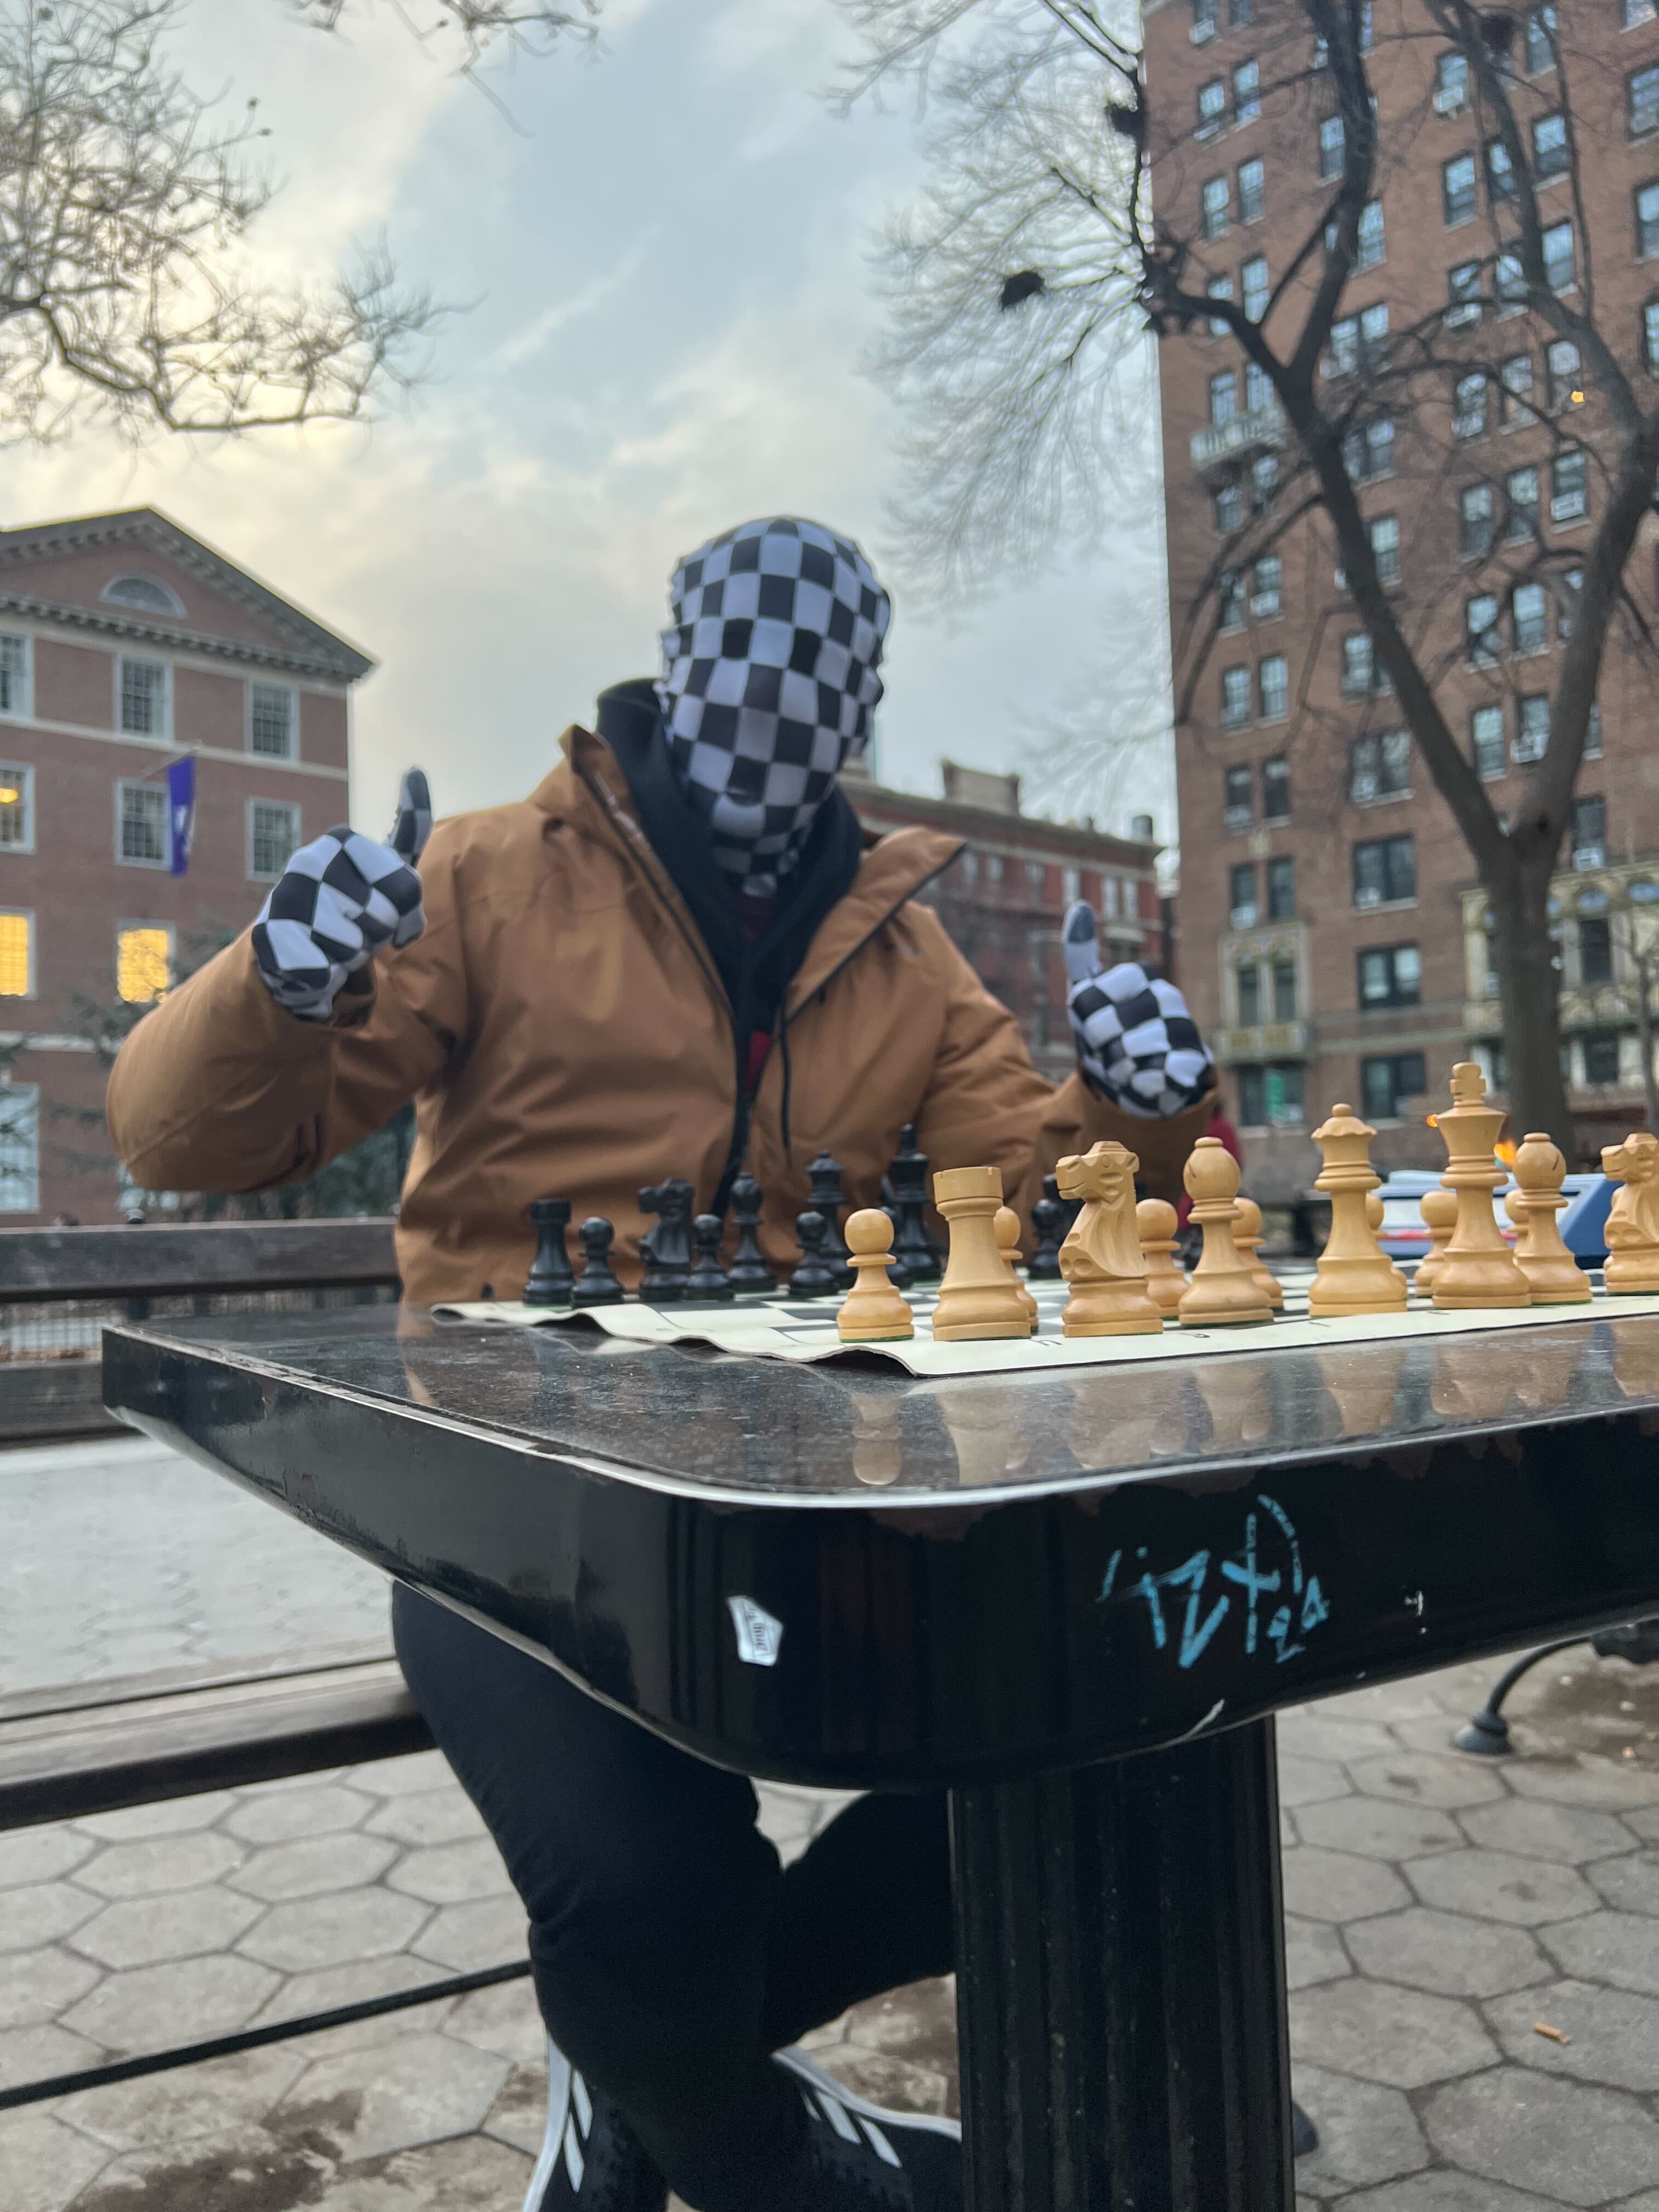 GothamChess is a Grandmaster!!! - Chess Forums 